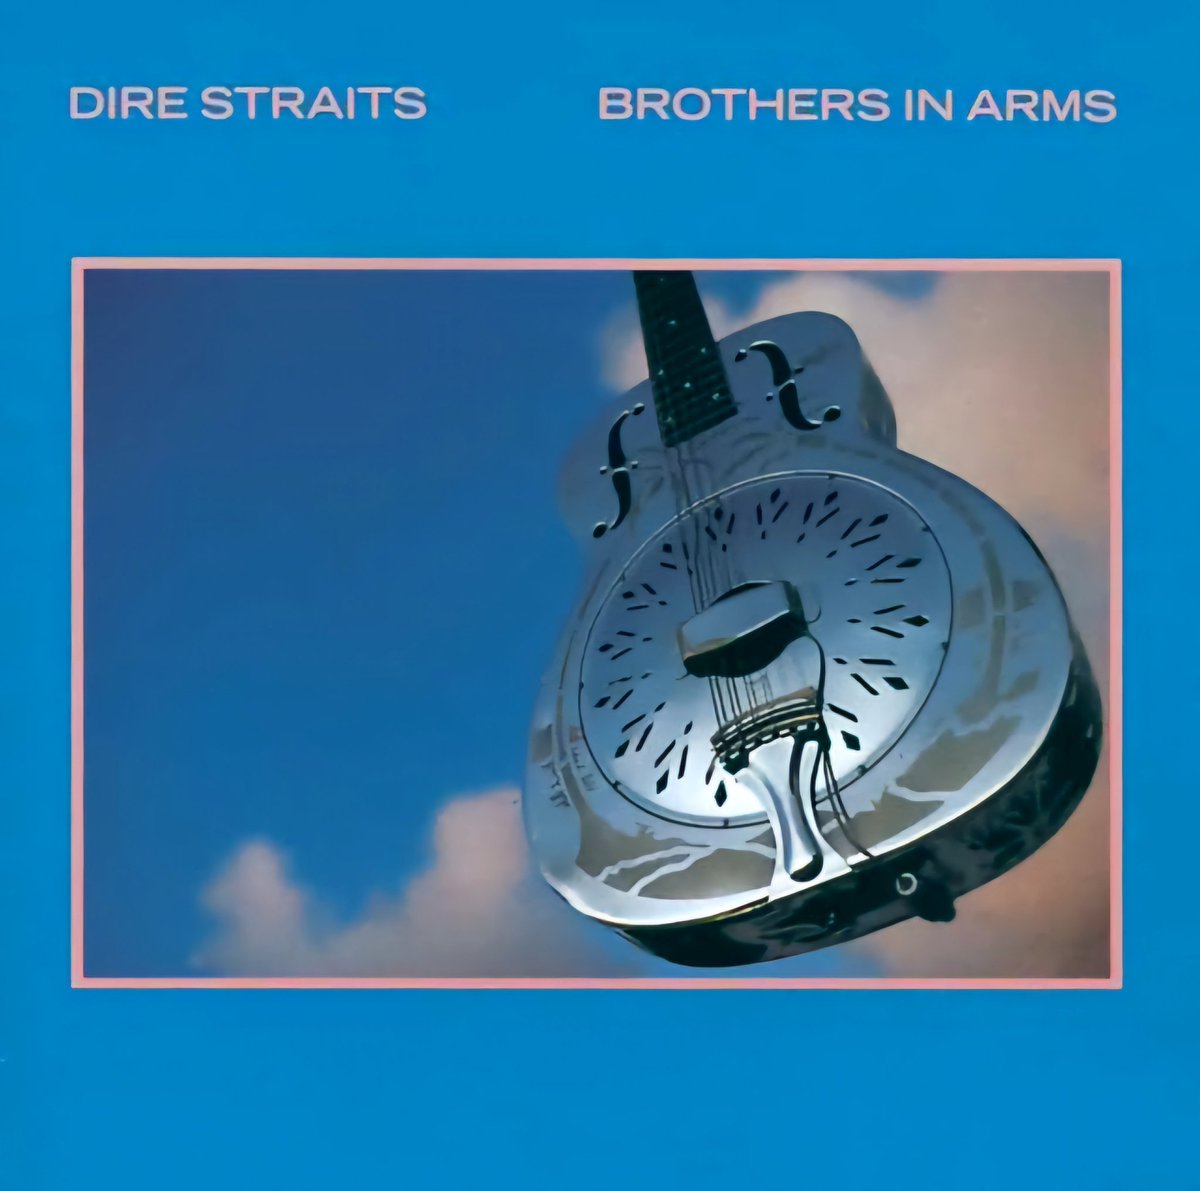 On this day in 1985, @direstraitshq released Brothers In Arms, still one of the world's best-selling albums, having sold over 30 million copies worldwide.
 #music #rock #direstraits #markknopfler #brothersinarms